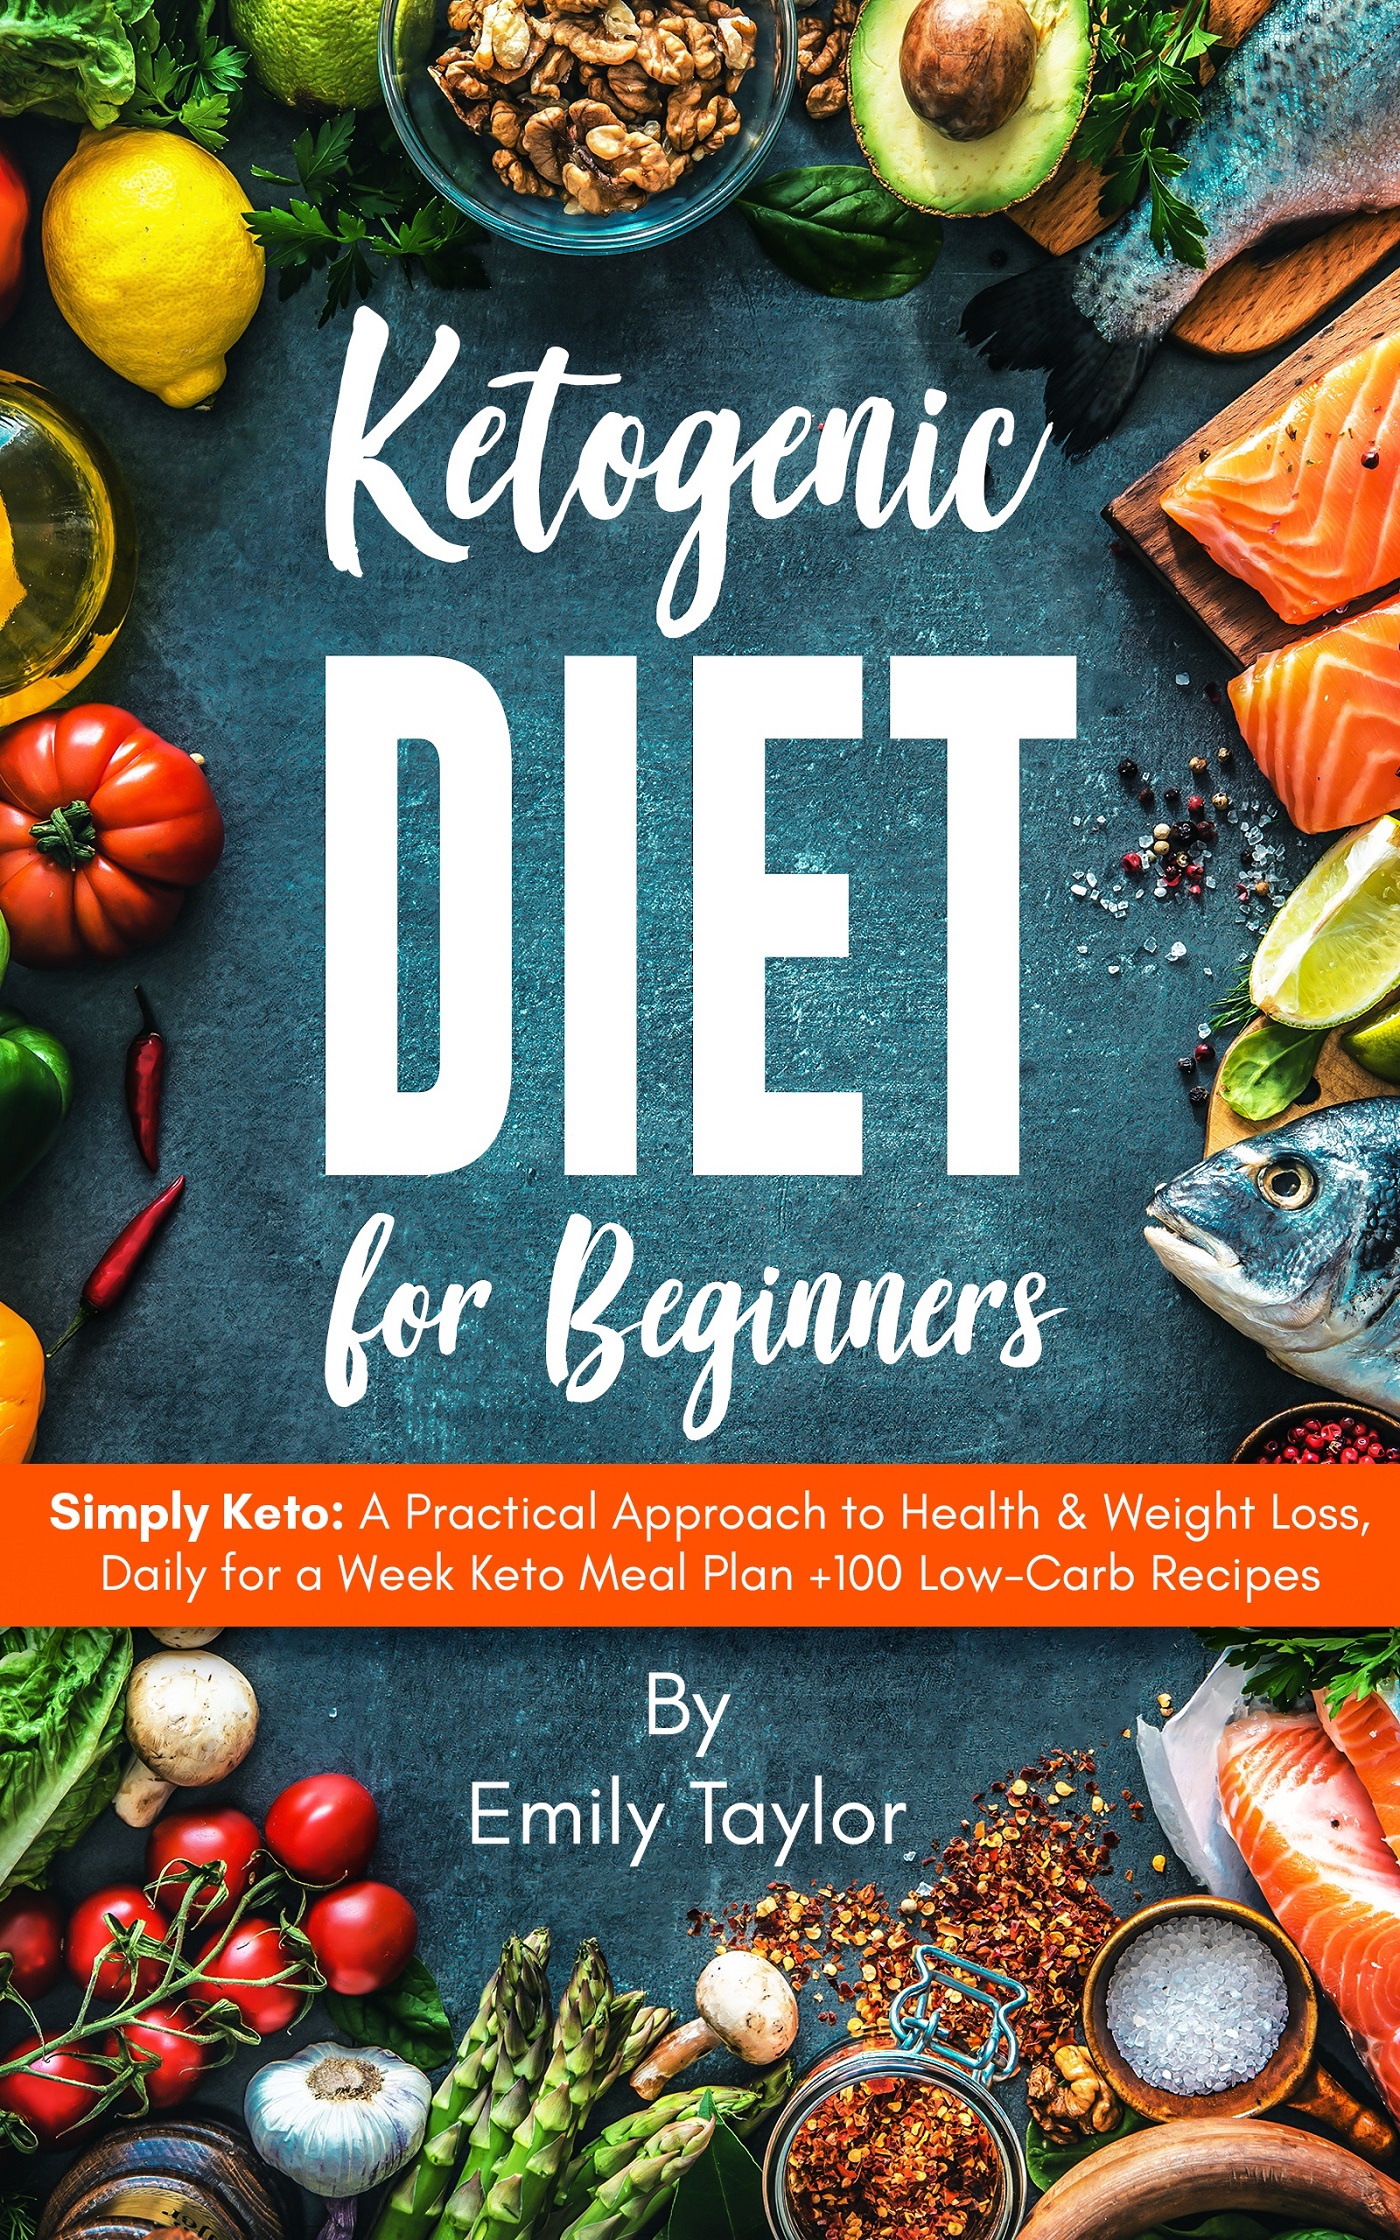 FREE: Ketogenic Diet for Beginners:Simply Keto: A Practical Approach to Health & Weight Loss, Daily for a Week Keto Meal Plan +100 Low-Carb Recipes by Emily Taylor